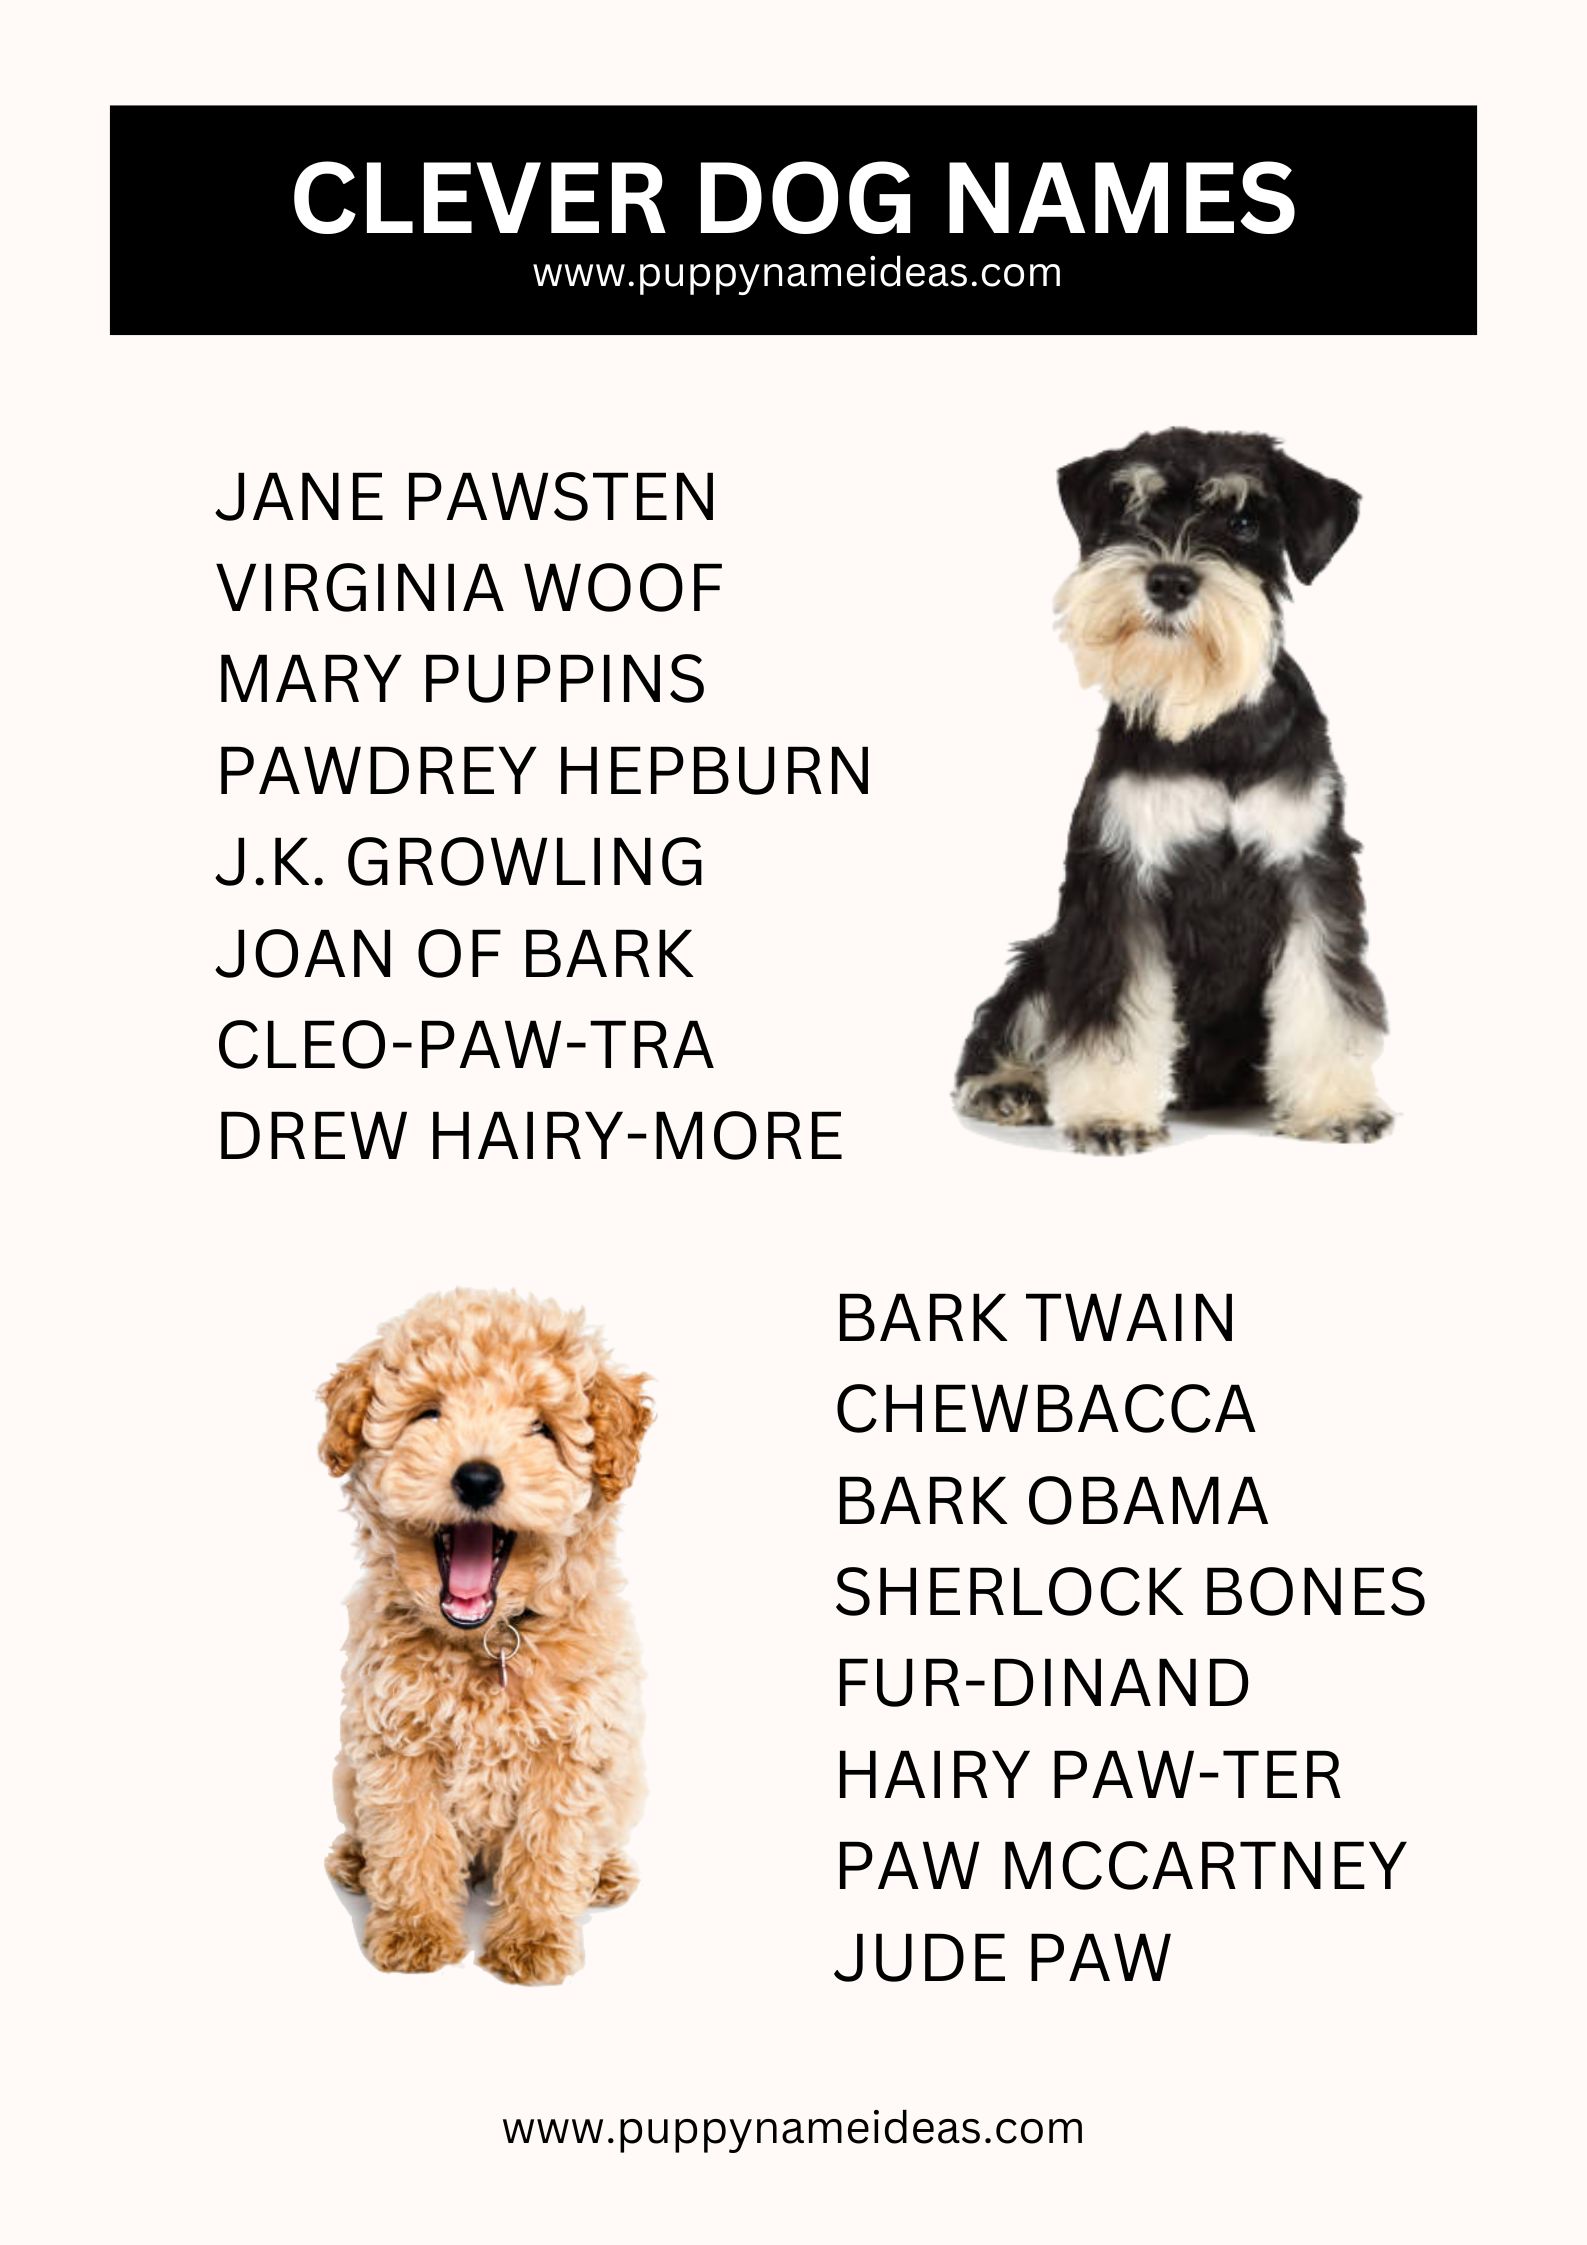 List Of Clever Dog Names